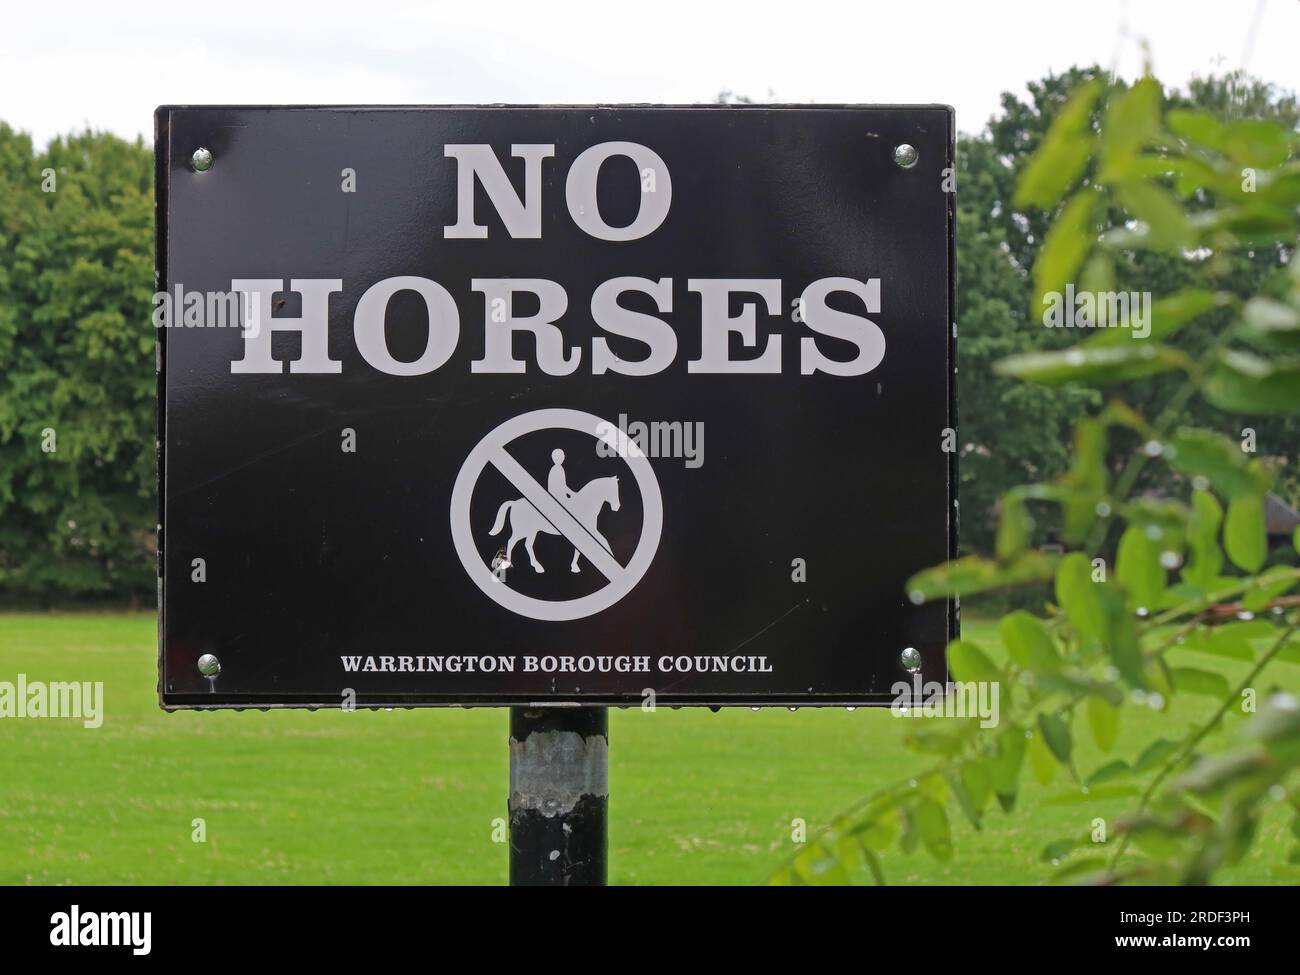 No horses or horse riding sign, by order of Warrington Borough Council, Bell Lane, Thelwall, South Warrington, Cheshire, England, UK, WA4 2SU Stock Photo